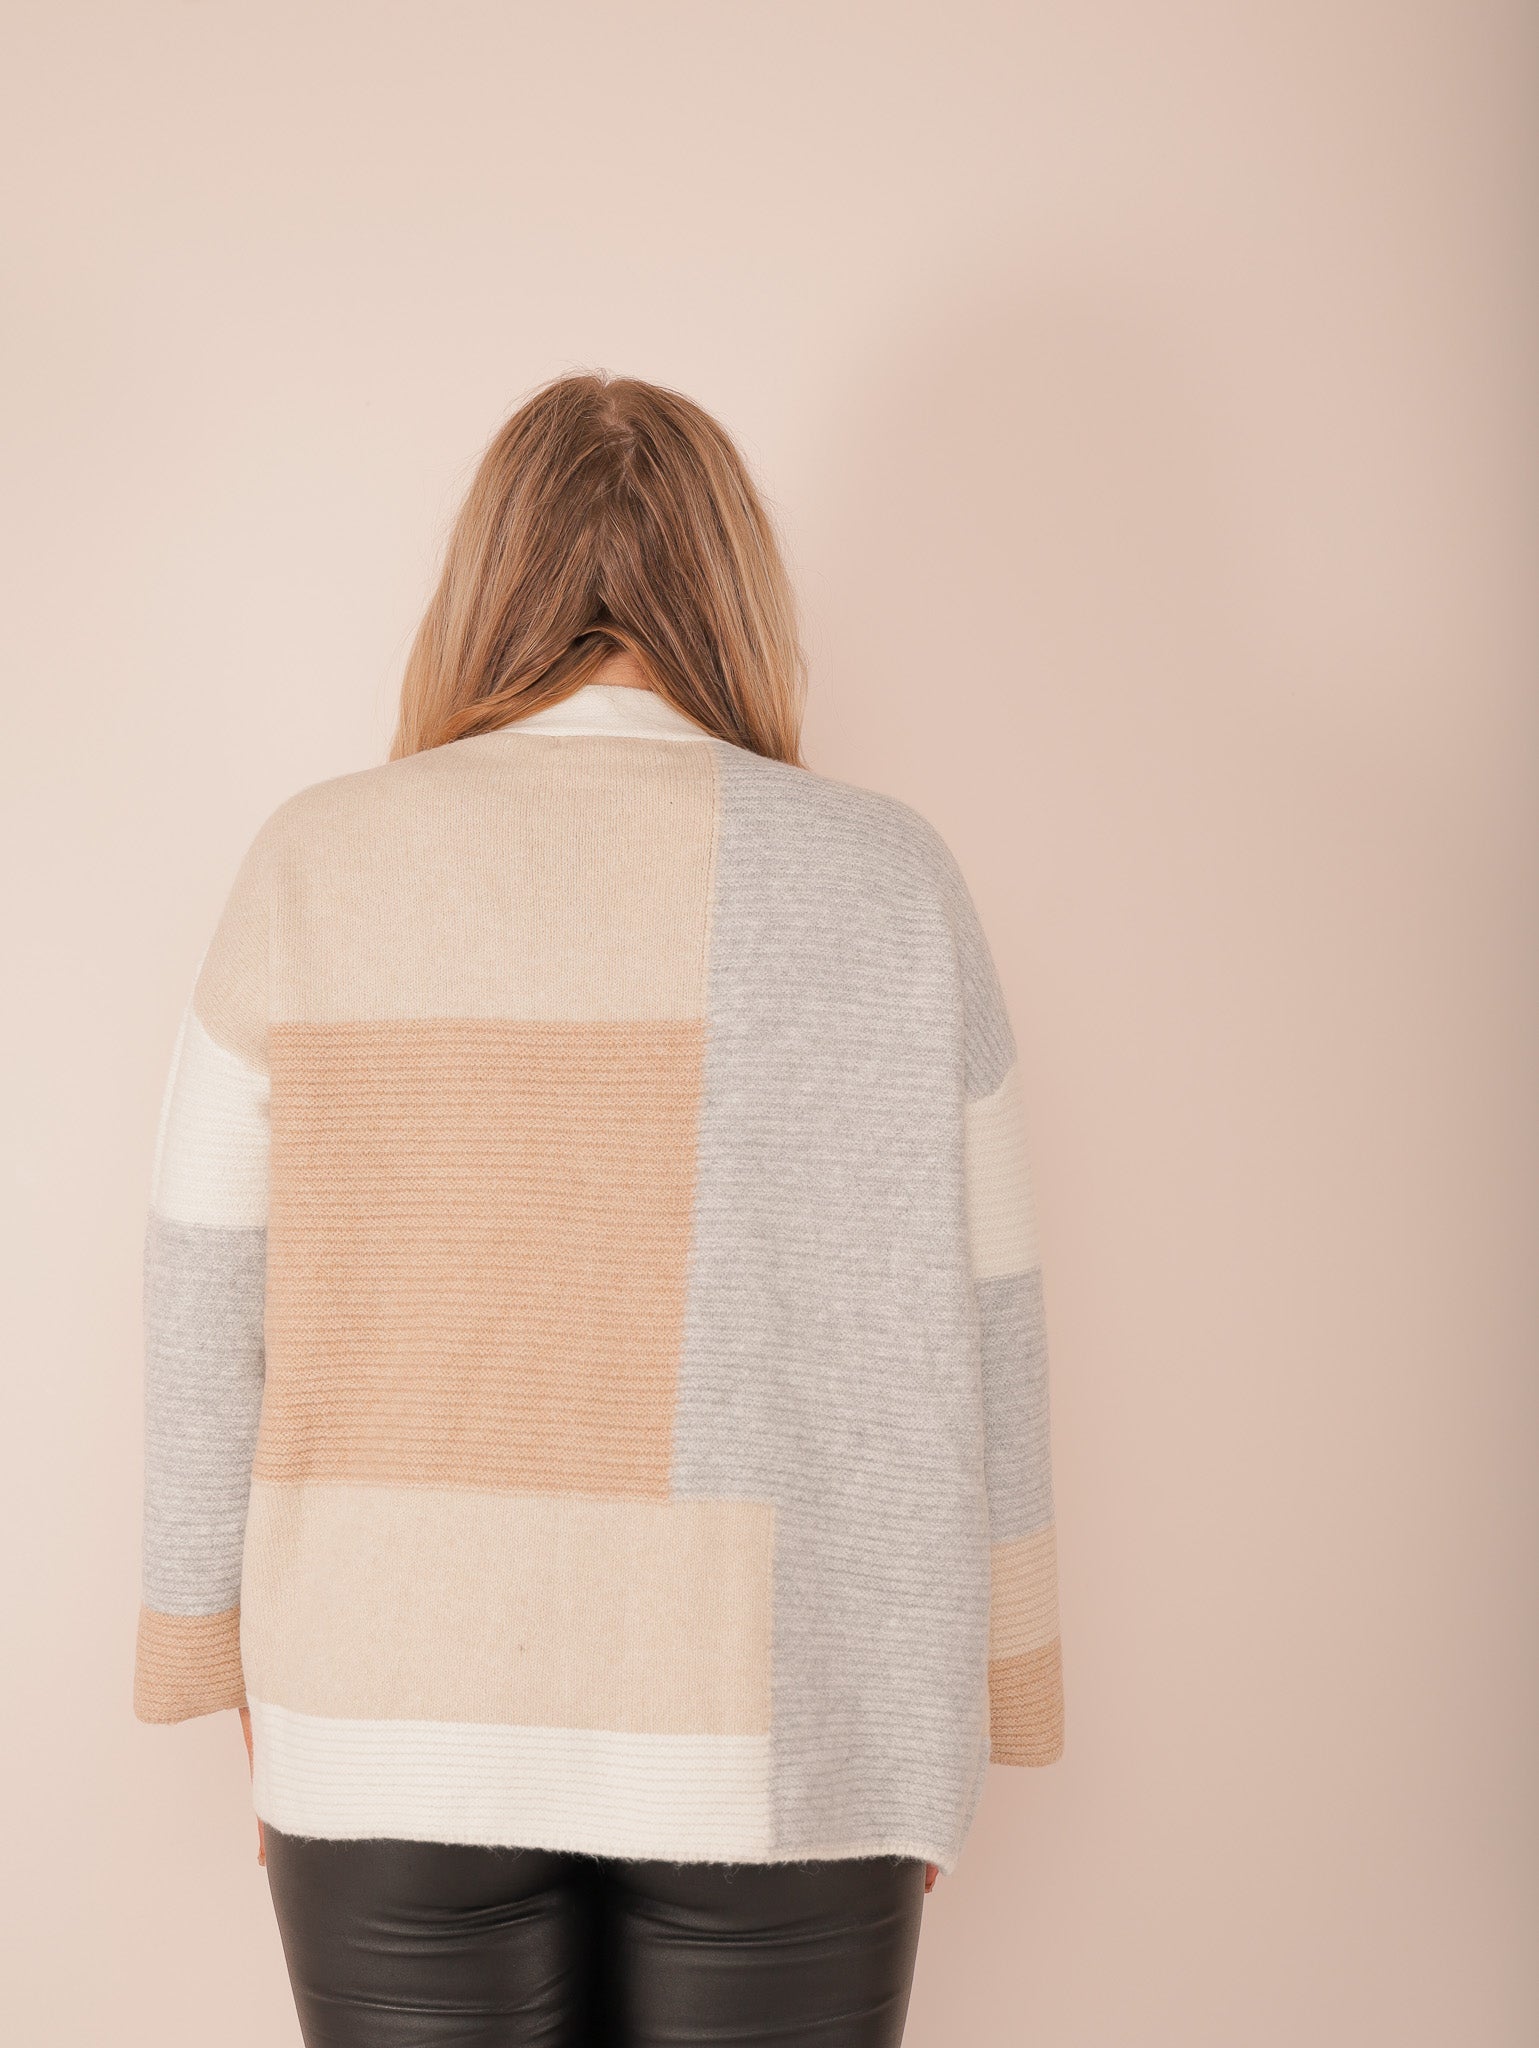 Molly Green - Colleen Stripe Cardigan - Sweaters_Cardigans